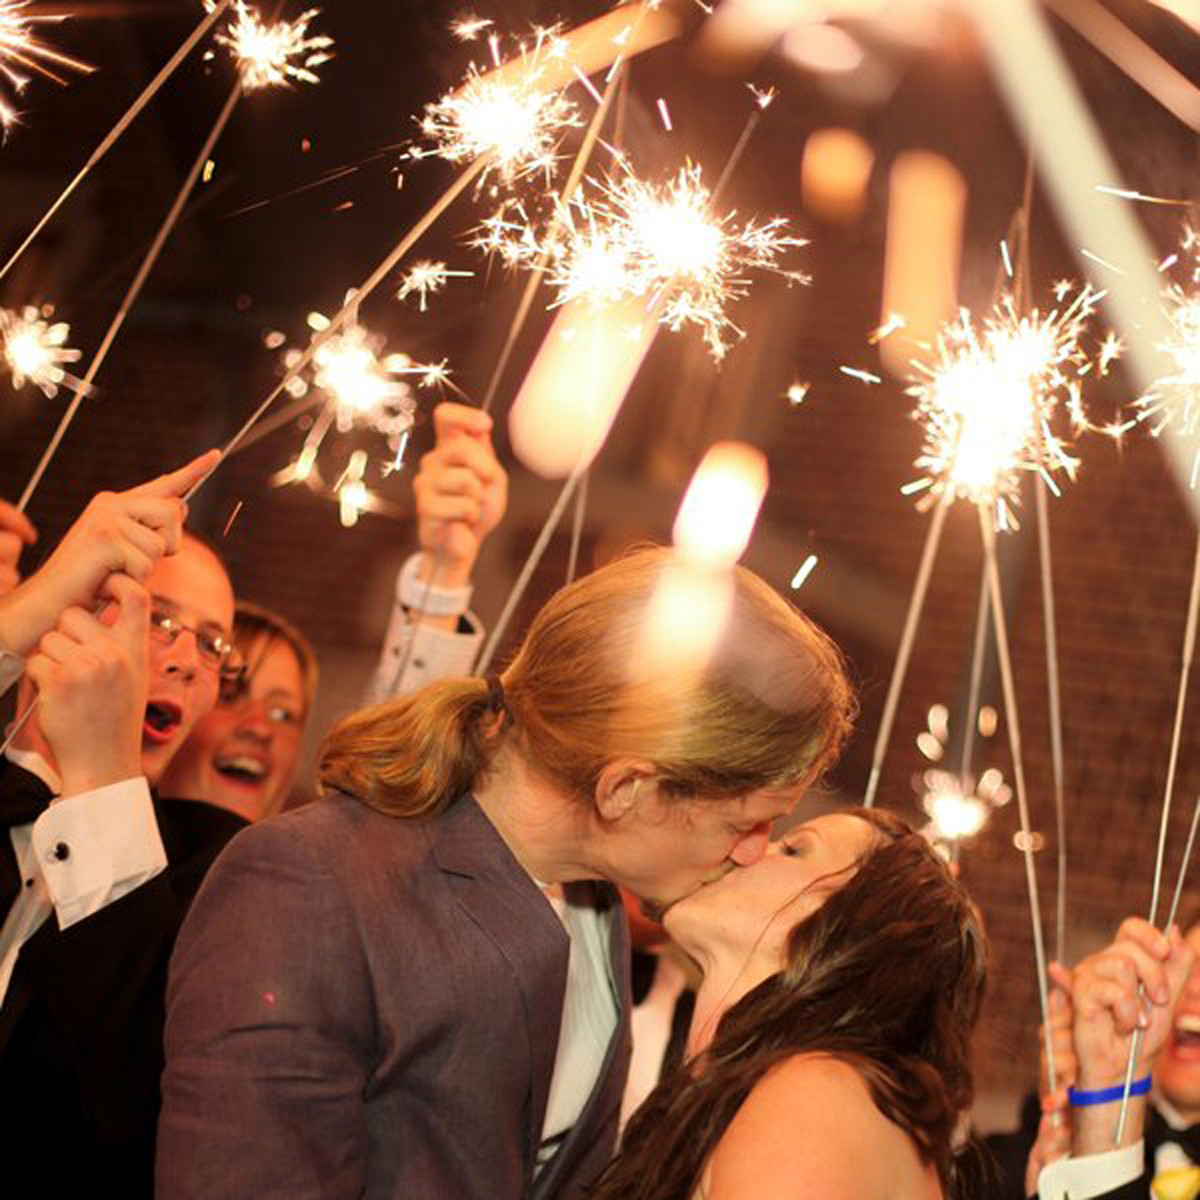 36 Inch Sparklers For Weddings
 36 Showtime Wedding Sparklers 48 pk Wedding Sparklers USA